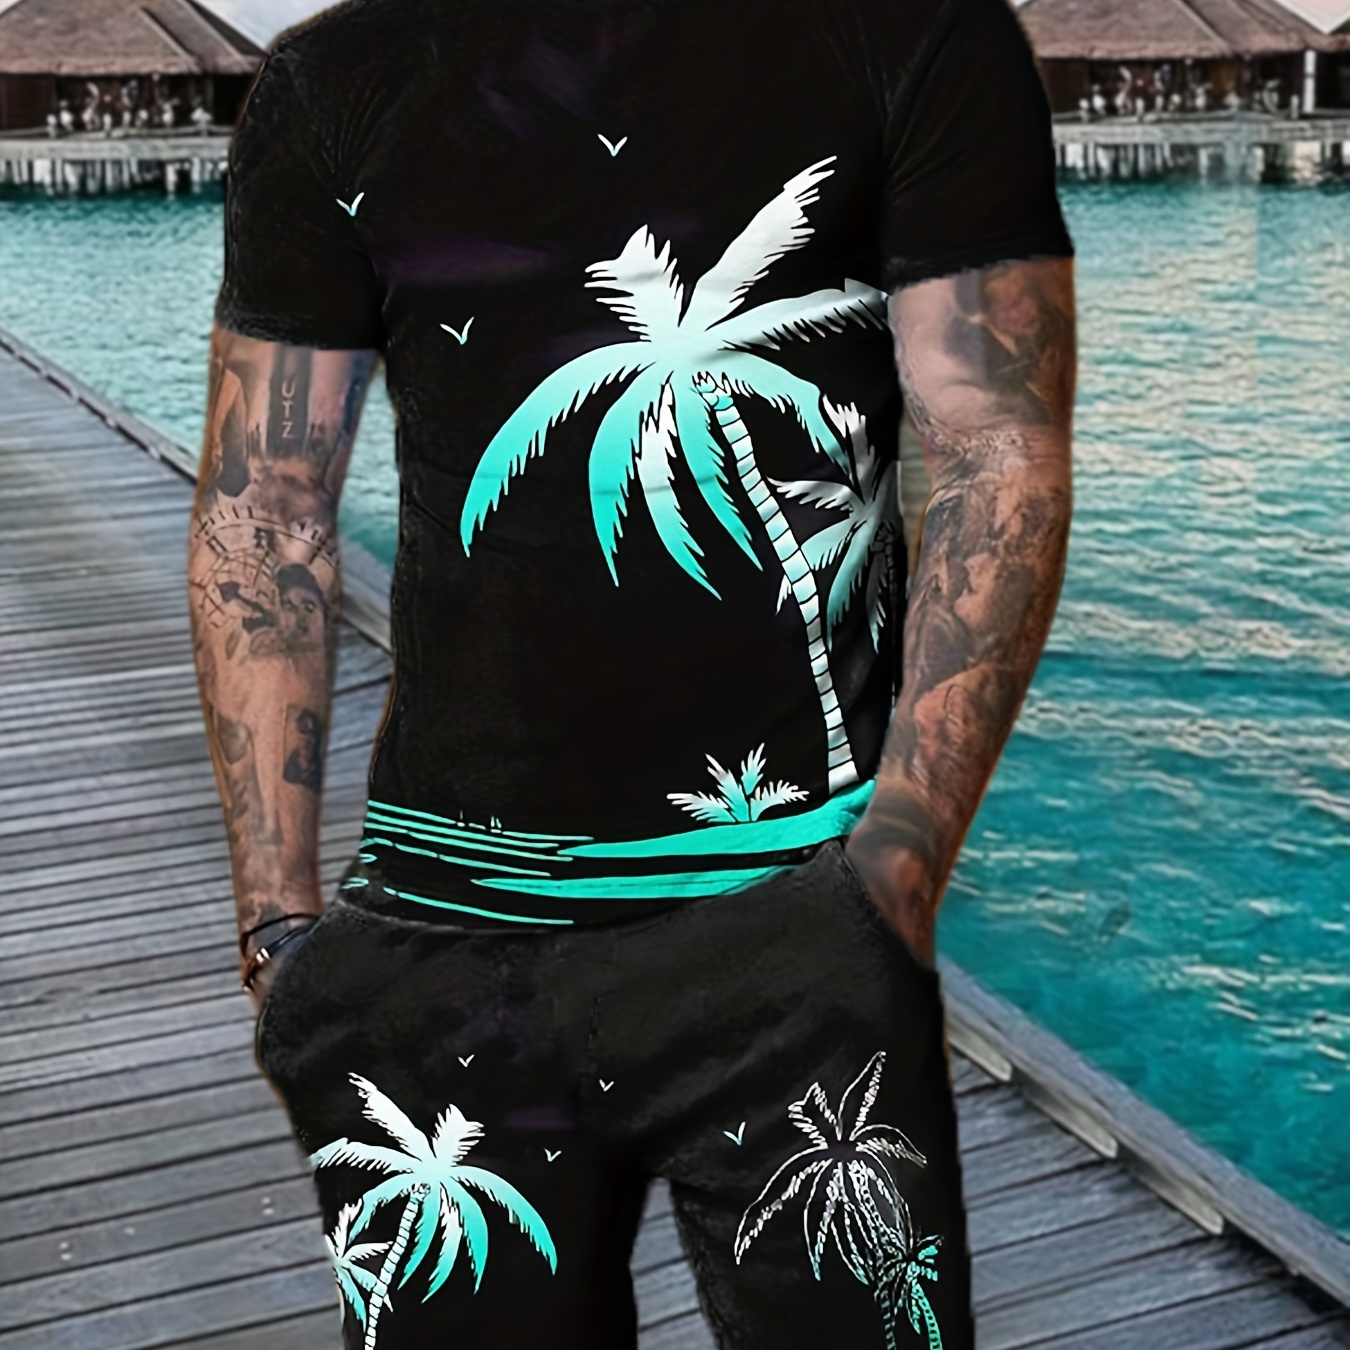 

Coconut Tree Print, Men's 2pcs Outfits, Casual Crew Neck Short Sleeve T-shirt And Drawstring Shorts Set For Summer, Men's Clothing Loungewear Vacation Workout